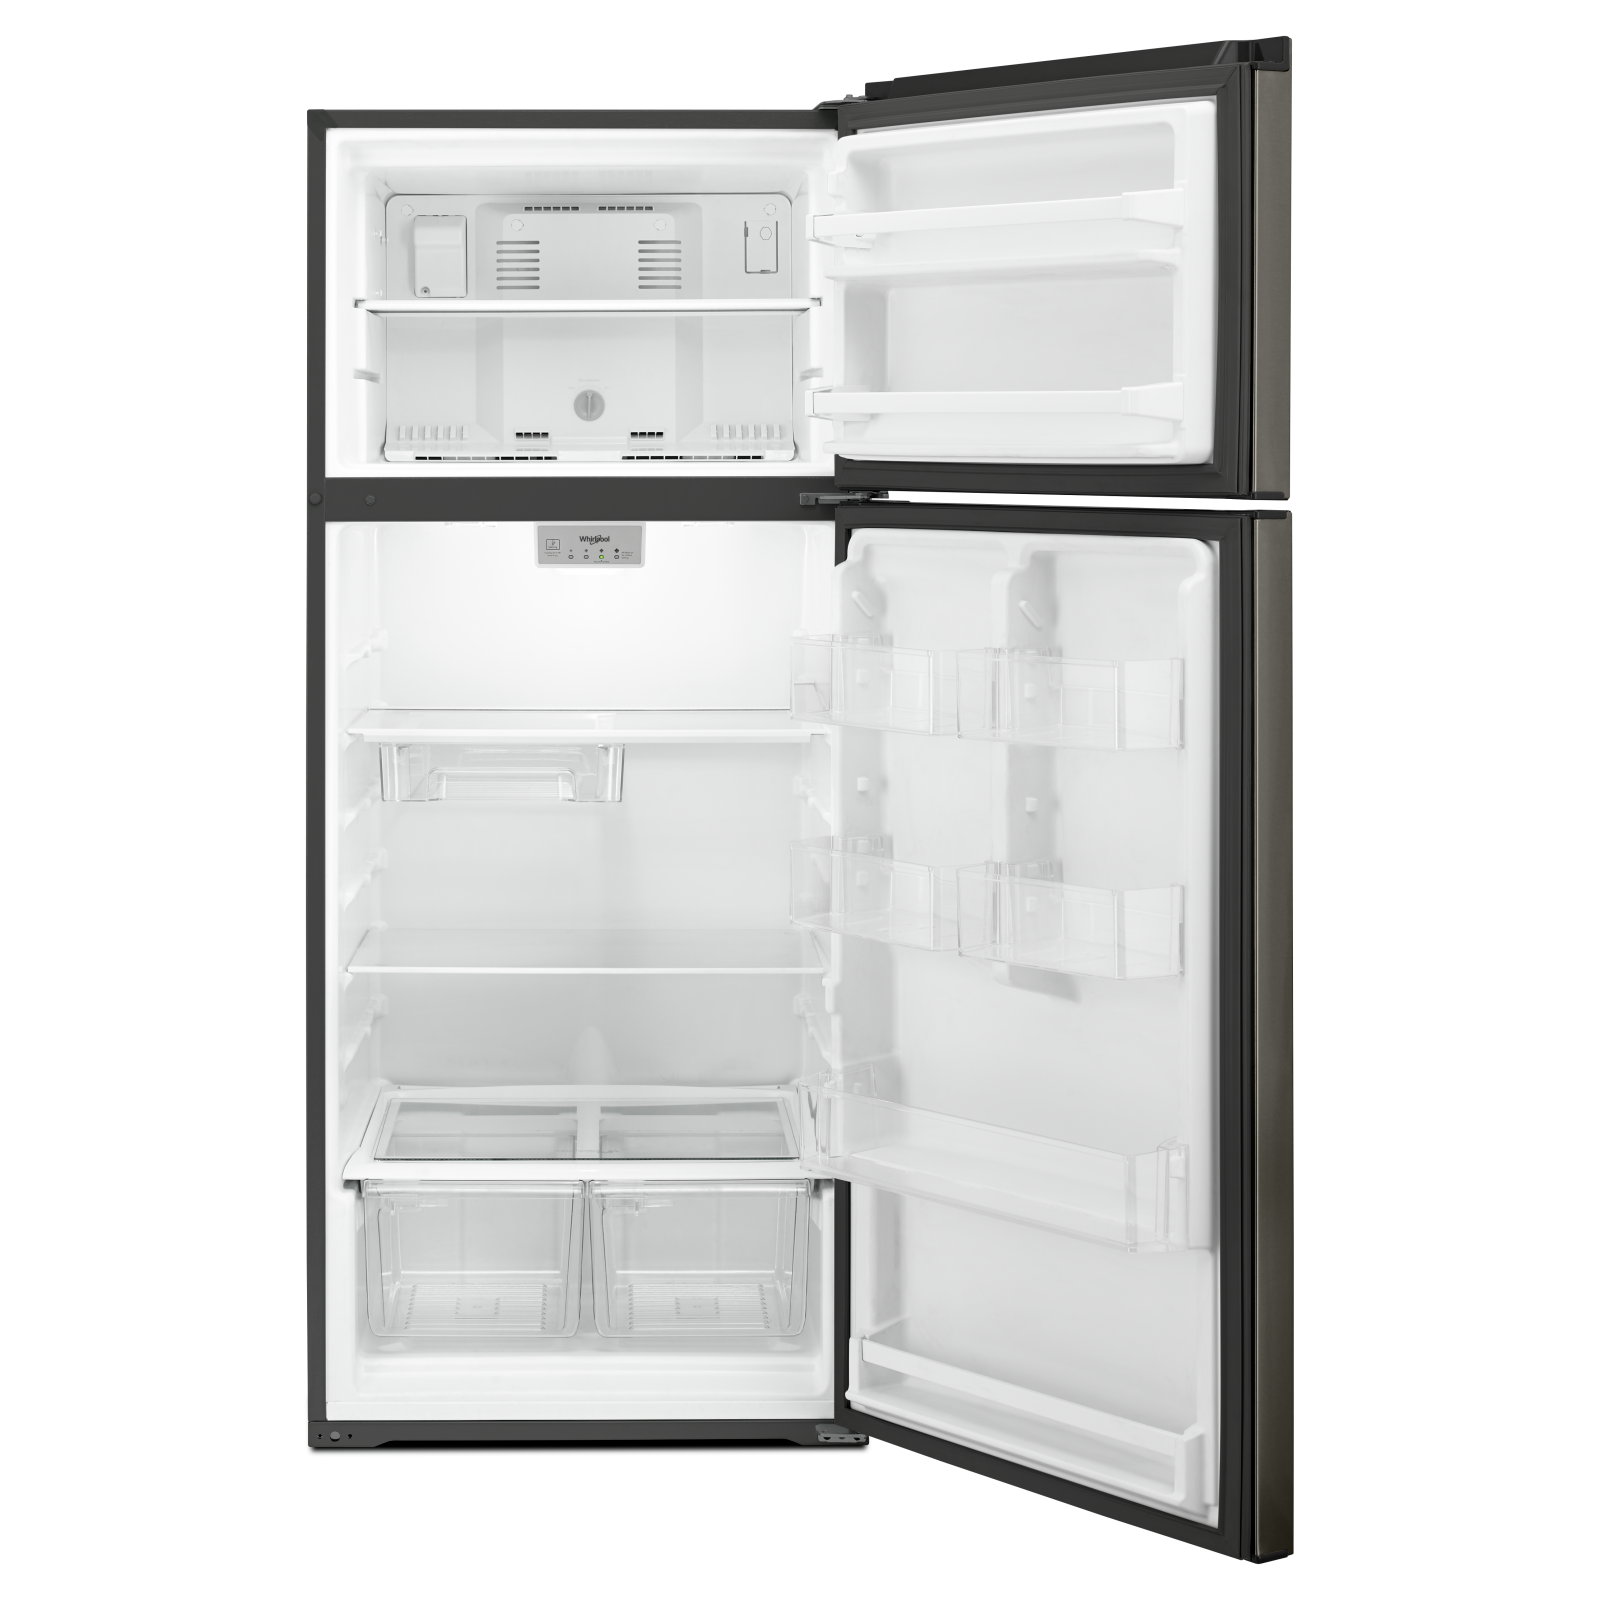 Whirlpool - 28 Inch 17.61 cu. ft Top Mount Refrigerator in Black Stainless - WRT518SZKV